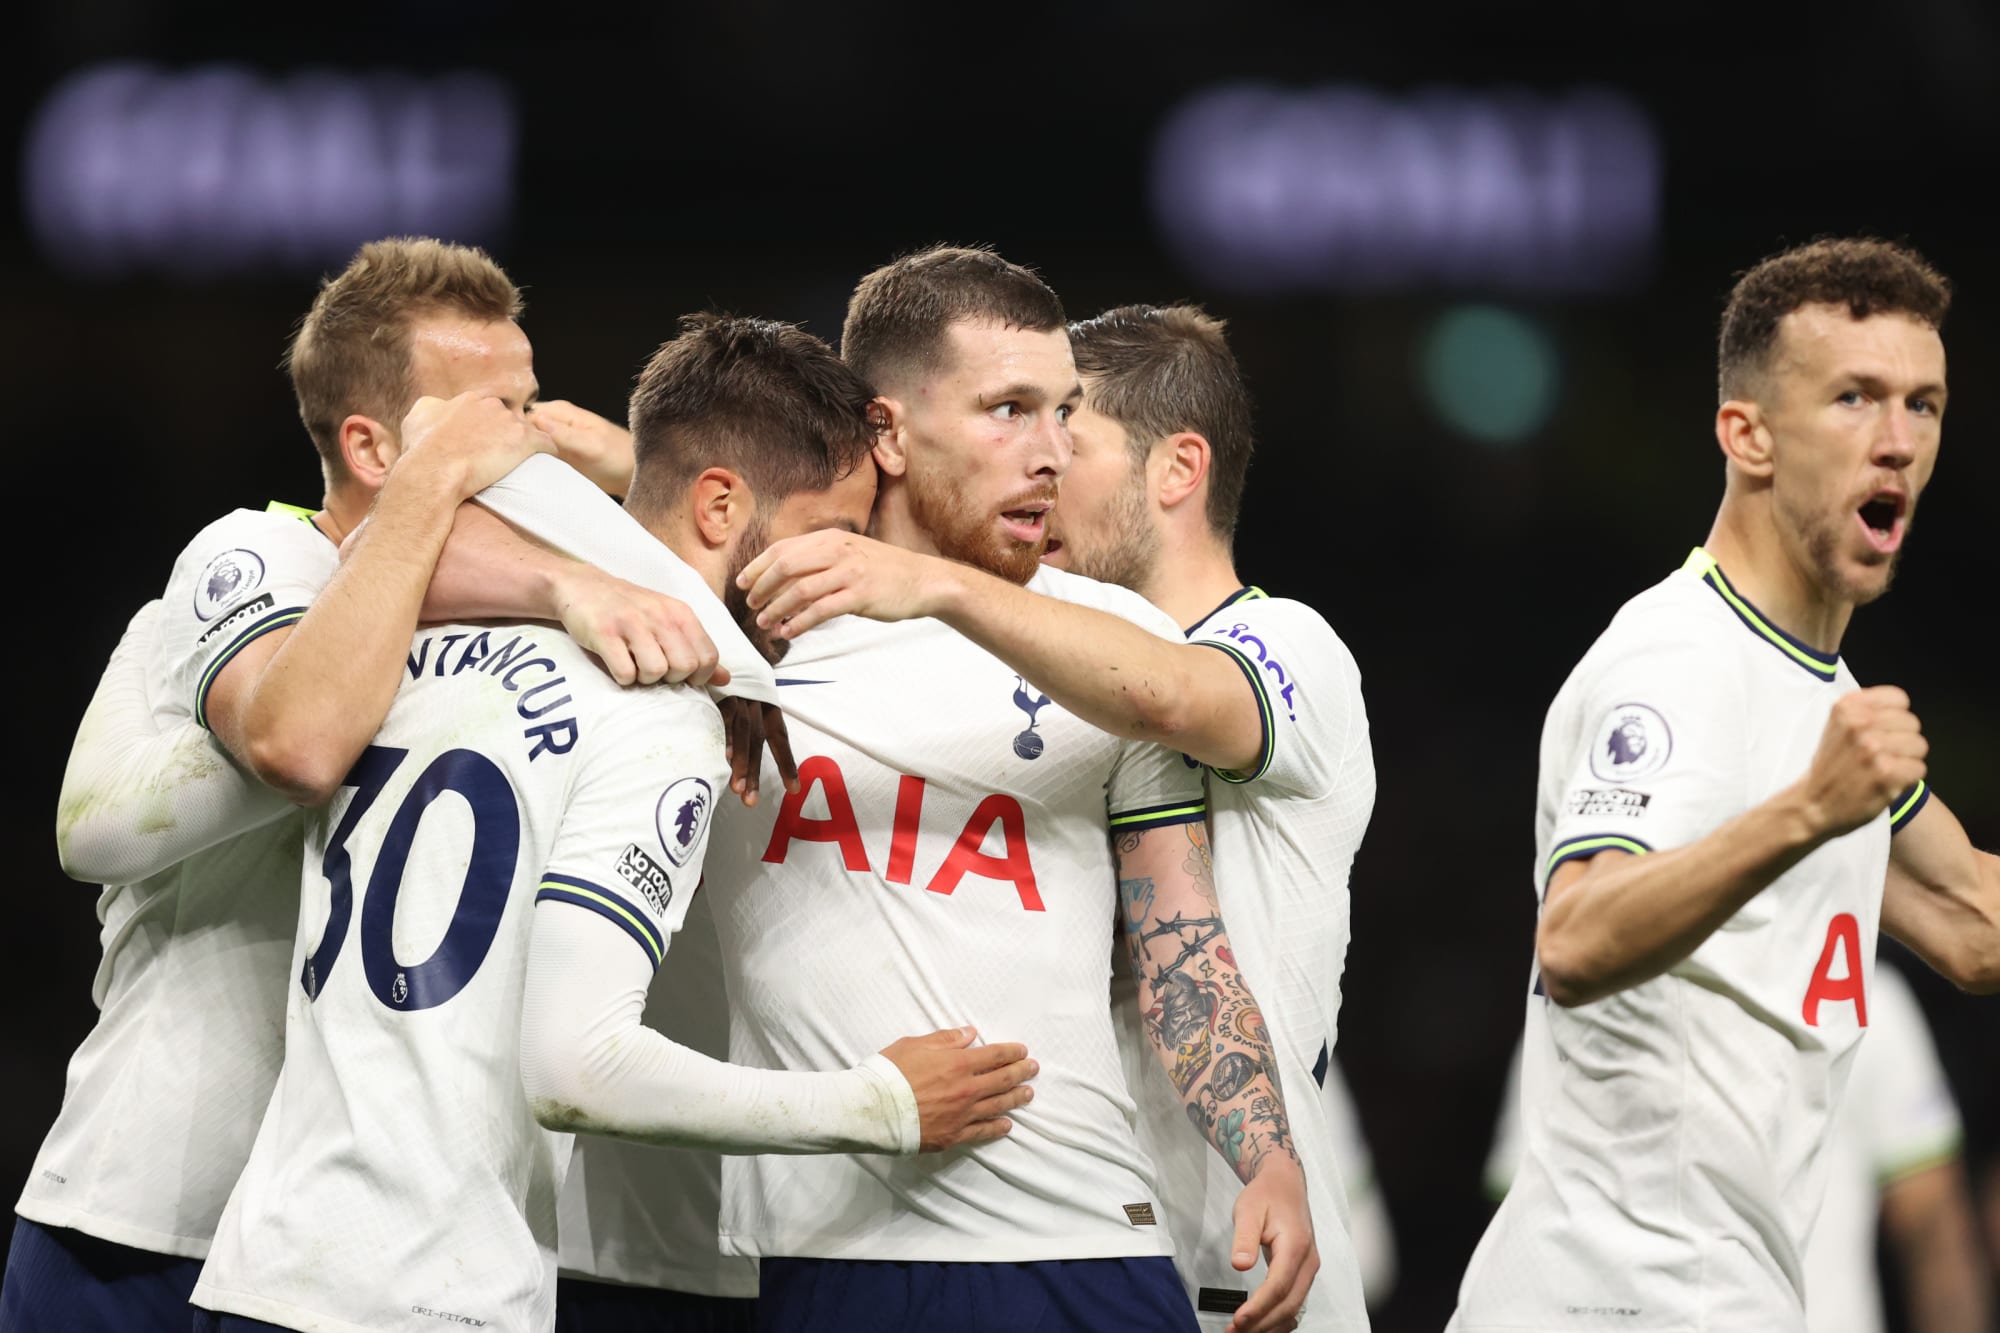 Dire situation for Tottenham Hotspur heading into Milan